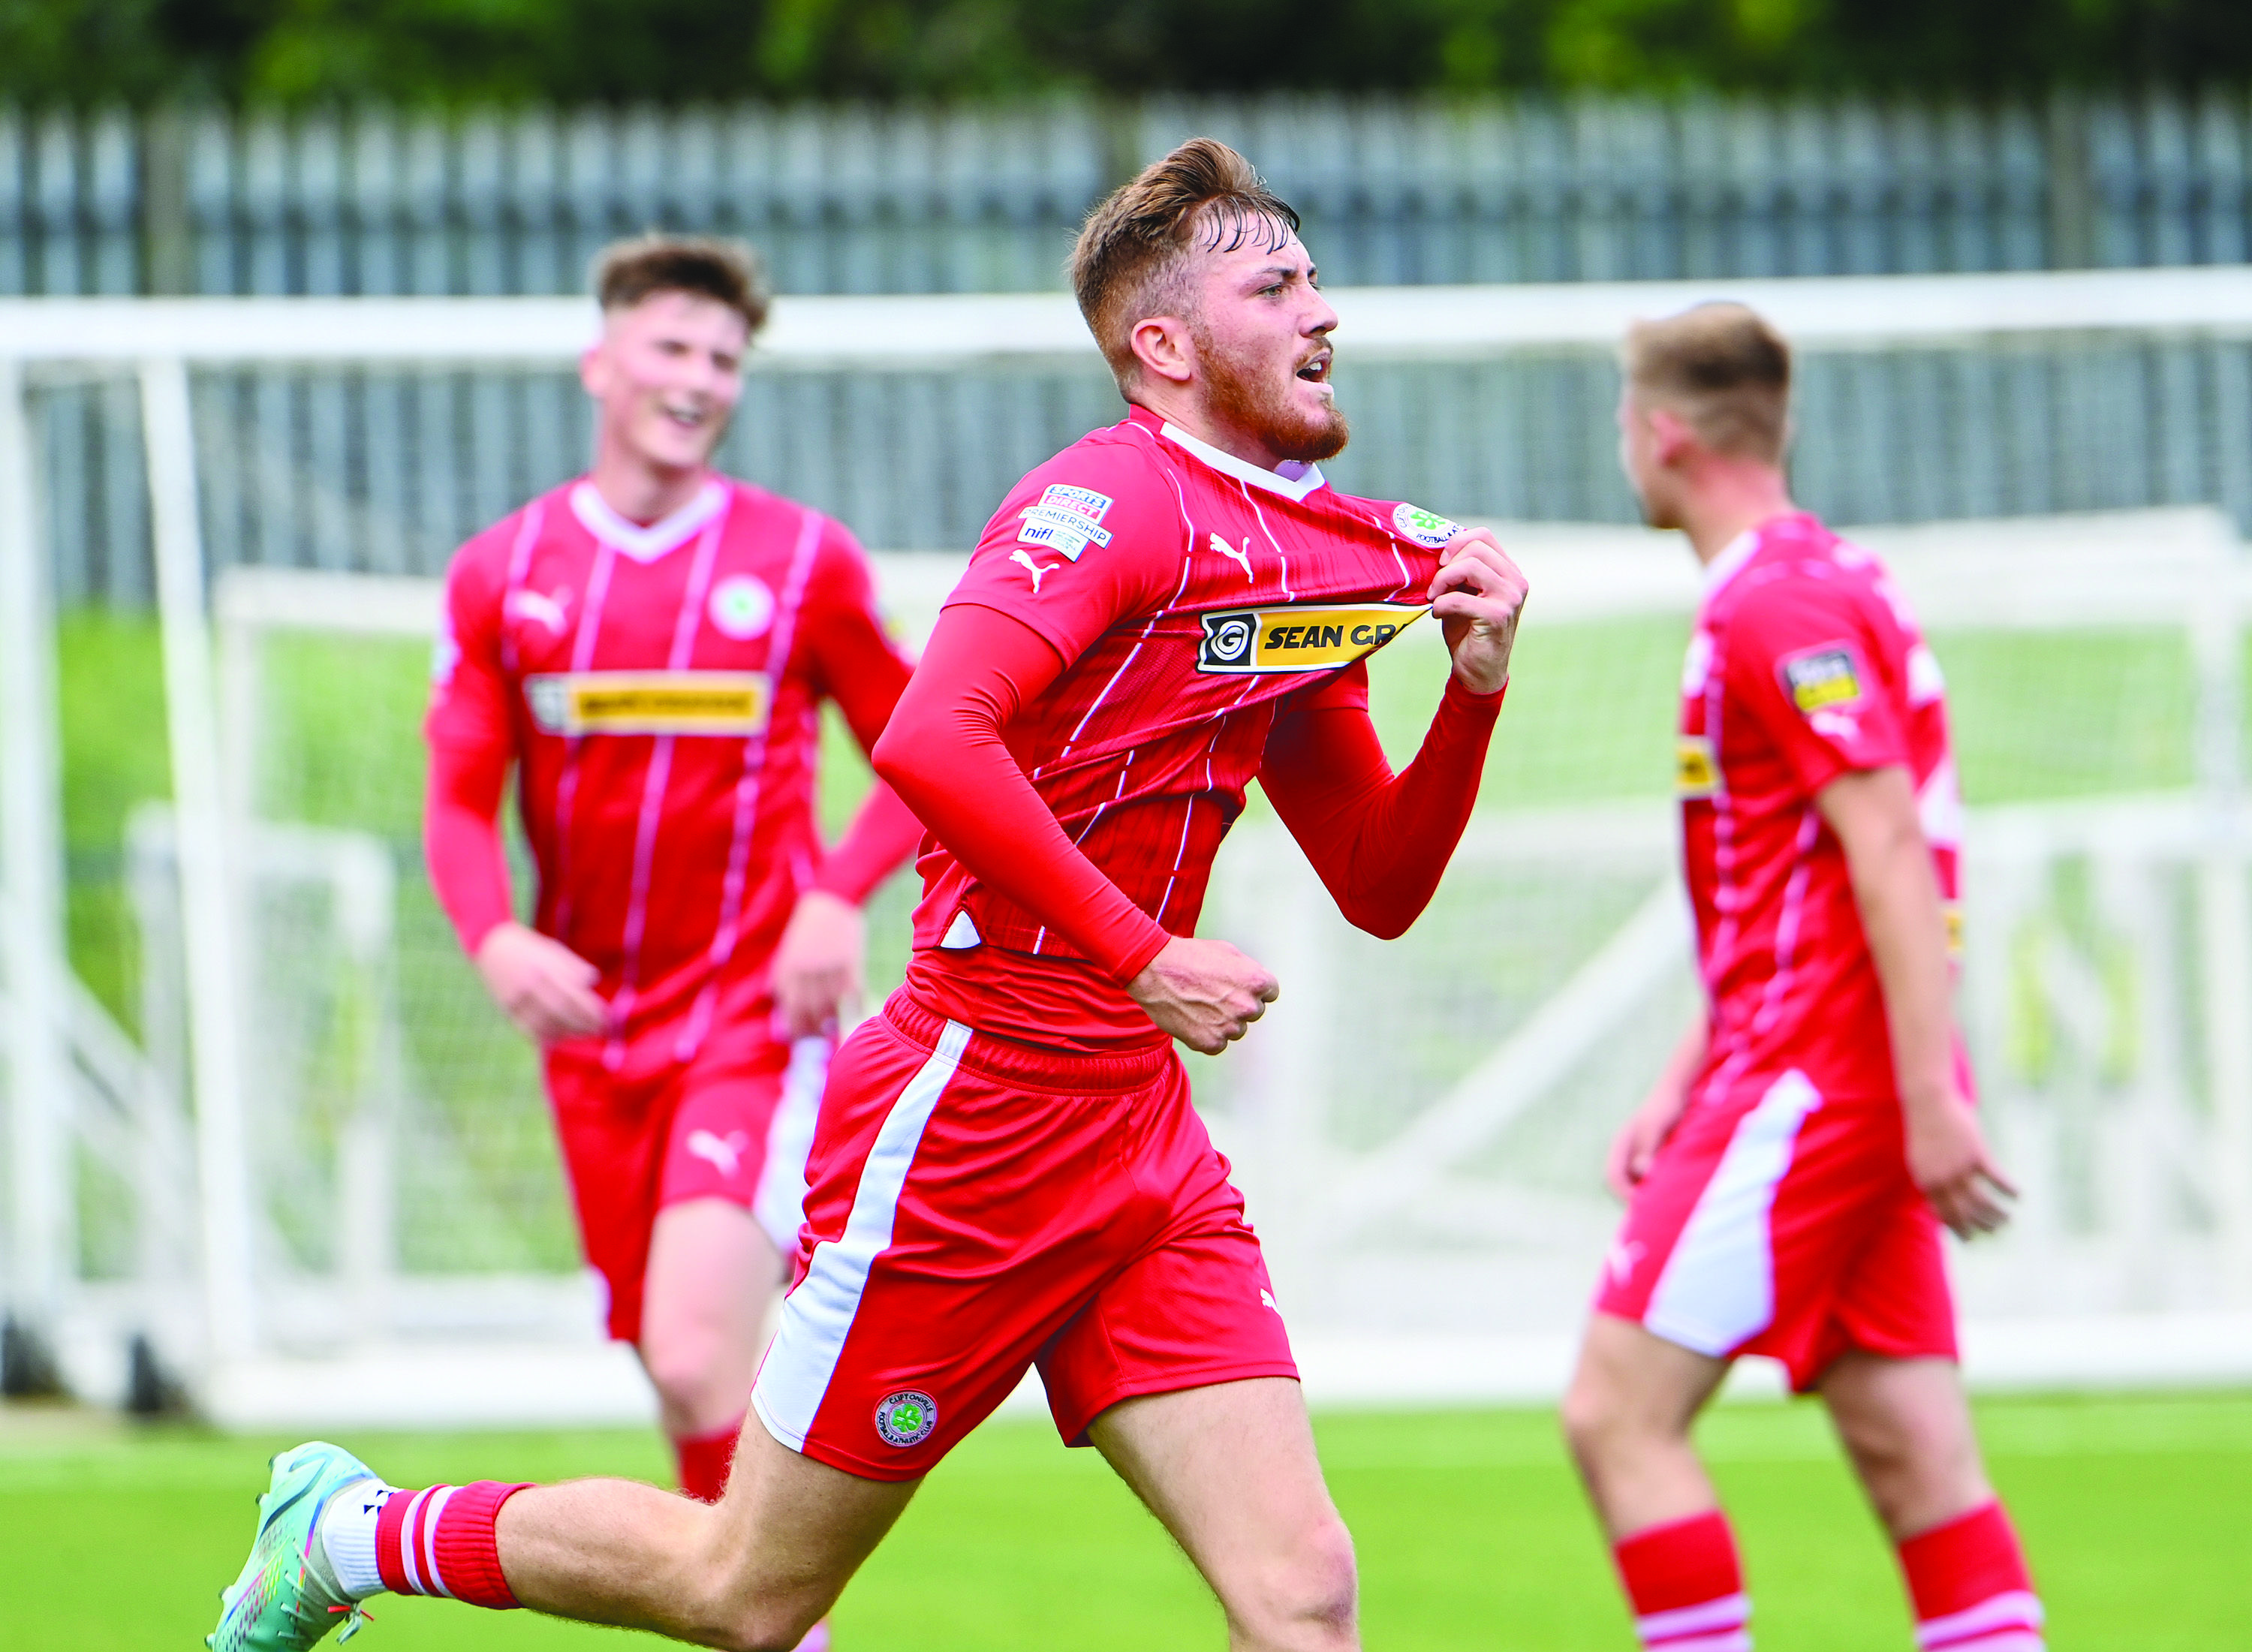 Sean Stewart made an immediate impact at Solitude with a goal on his debut